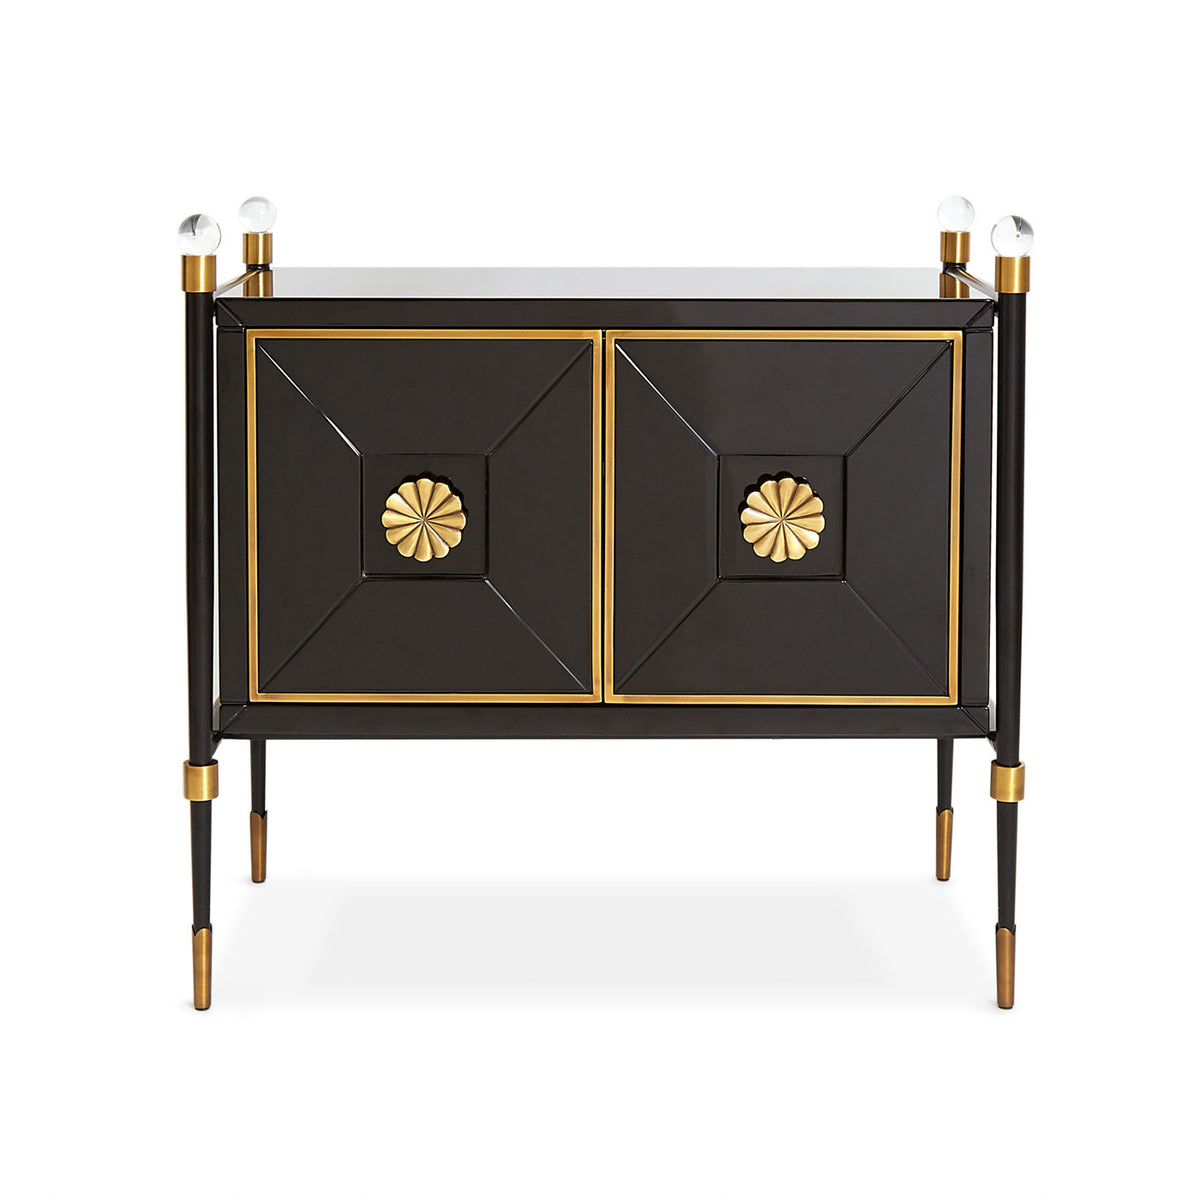 Rider Small Cabinet Series by Jonathan Adler